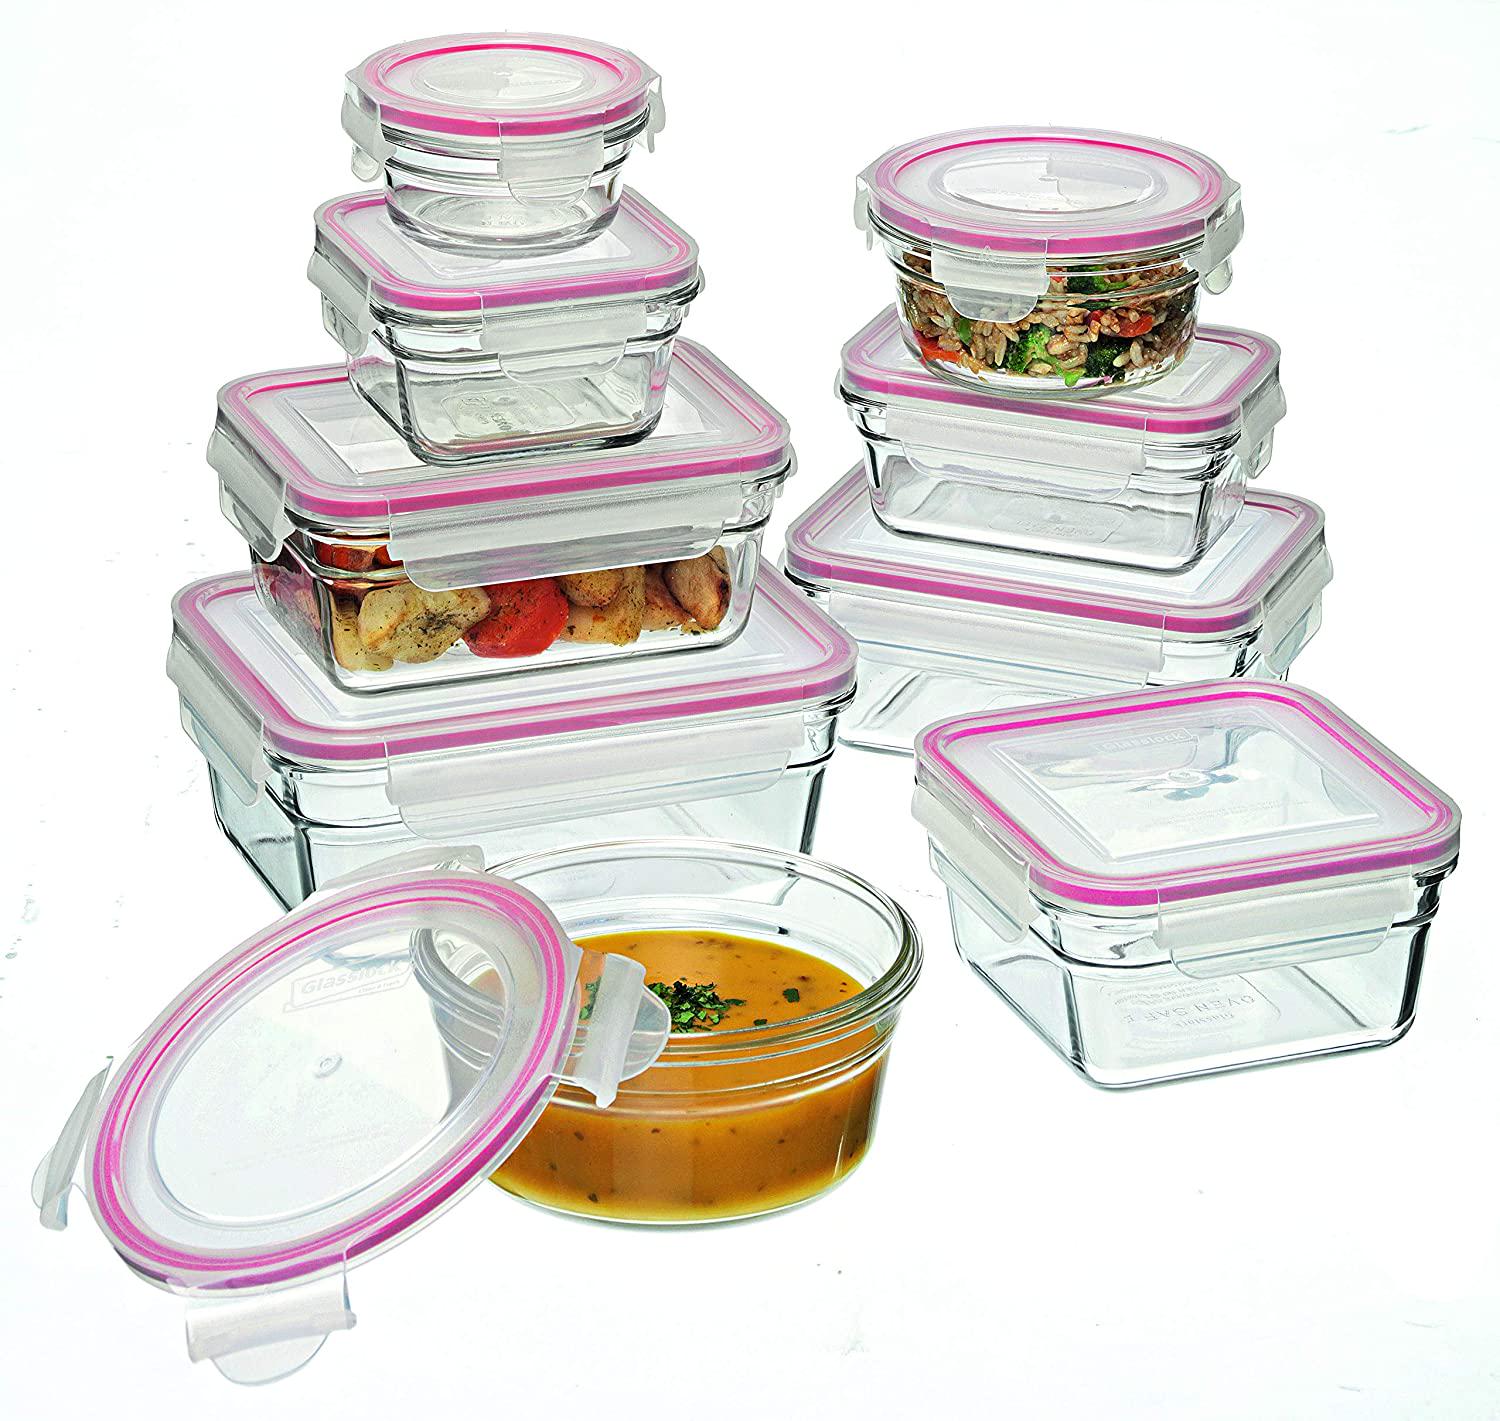 GLASSLOCK, Glasslock Oven Safe Glass Container, 9-Piece Set, Clear, GL-474